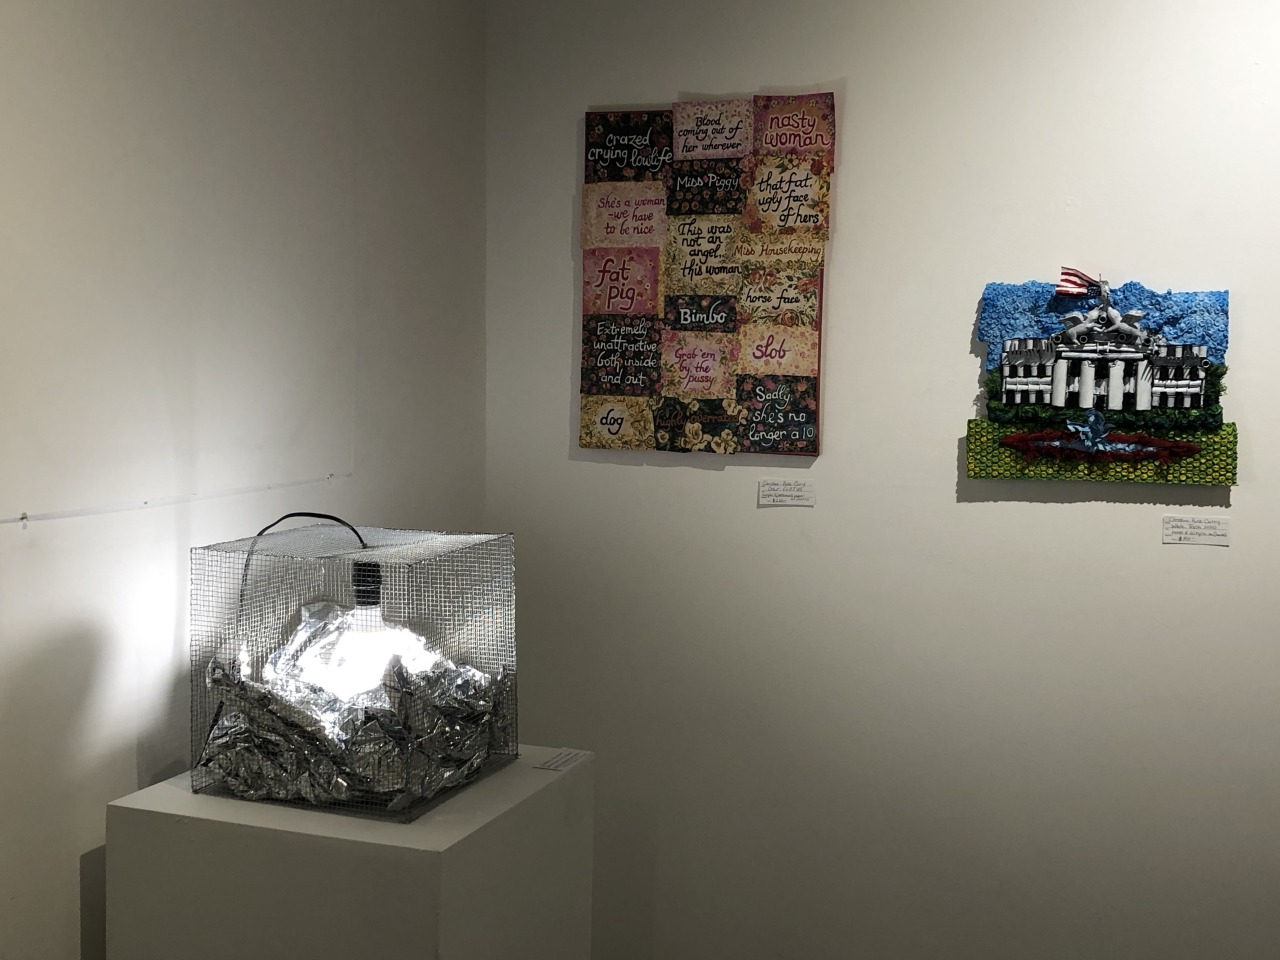  “¿Dónde están mis padres?” (Where are my parents?) Hardware cloth, space banket, light bulb, socket and electrical cord.  Good Trouble group exhibition of political art at Edge Gallery, Denver Oct 2-18, 2020 #scupture#lightbasedart#politicalart#immigrationrights#aclu